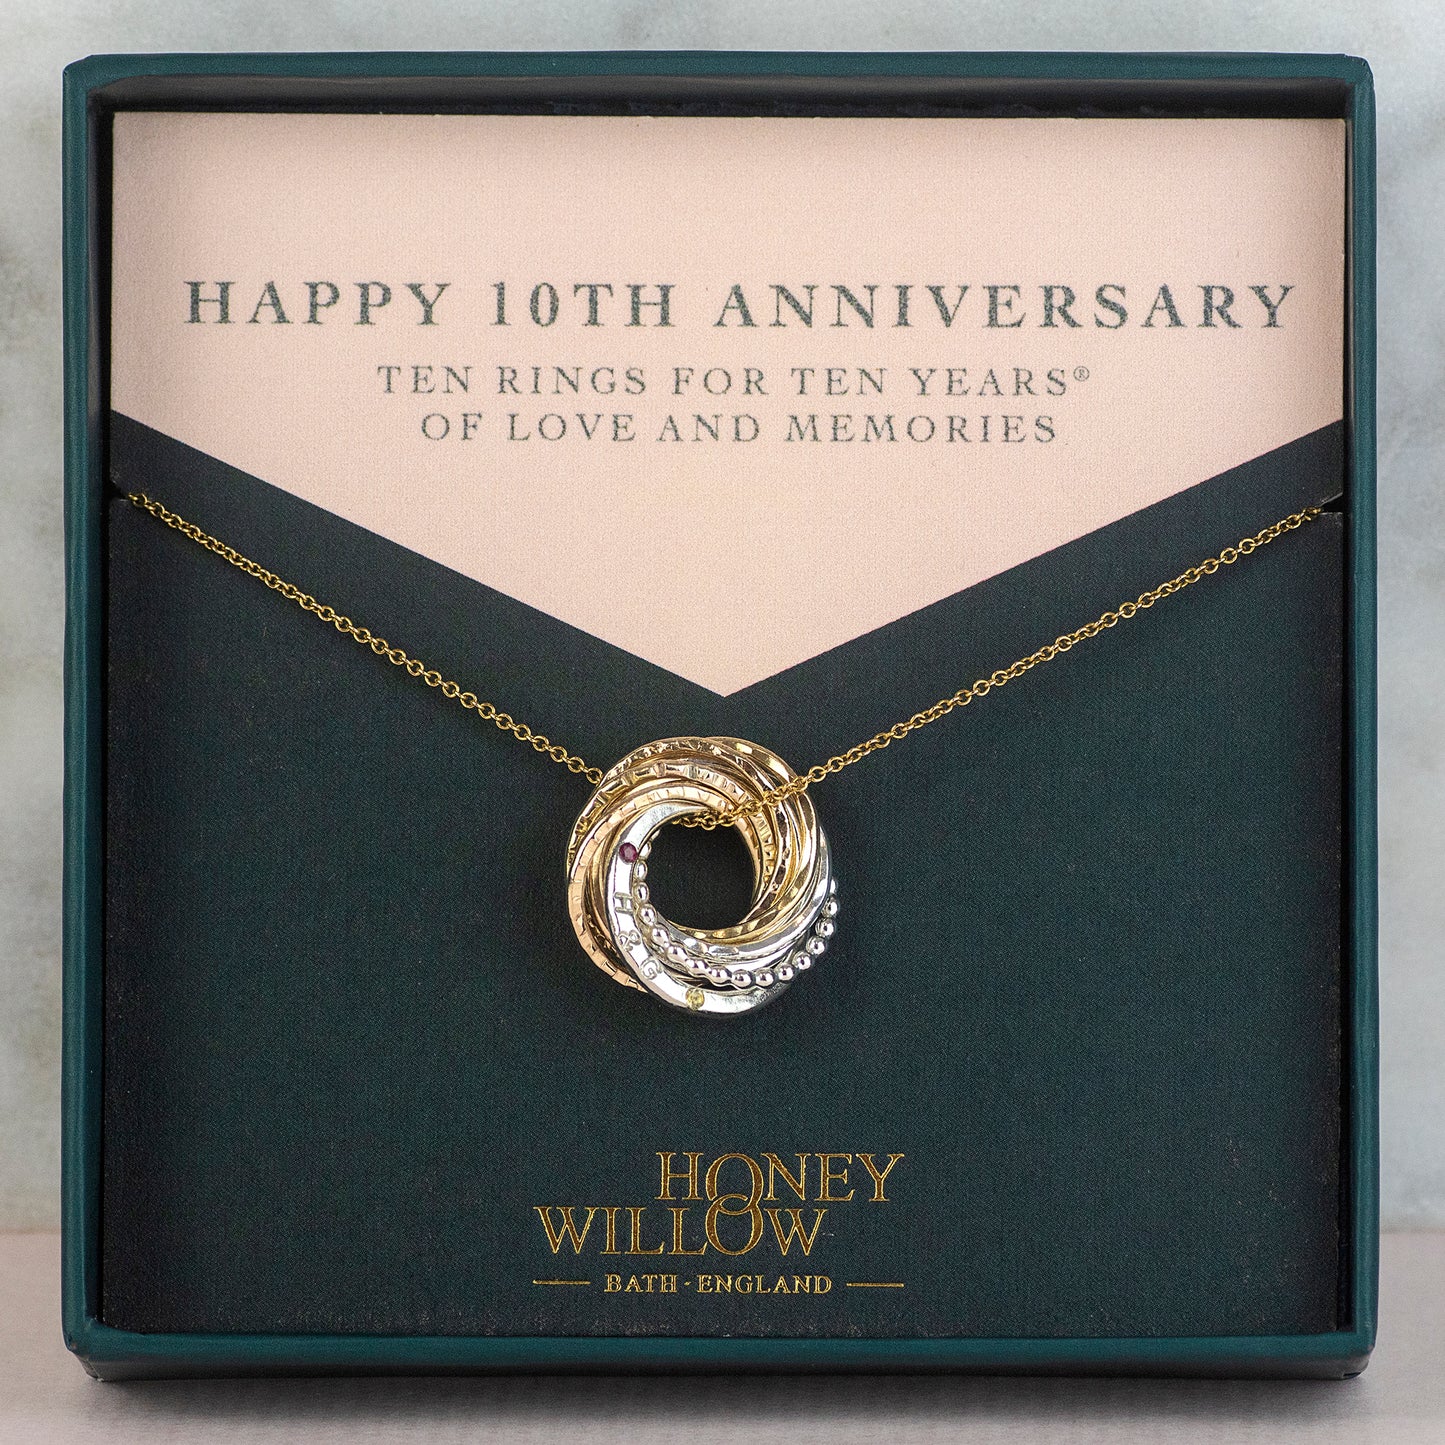 Personalised 10 Year Anniversary Birthstones Necklace - Hand-Stamped - Petite Mixed Metal - 10 Rings for 10 Years®